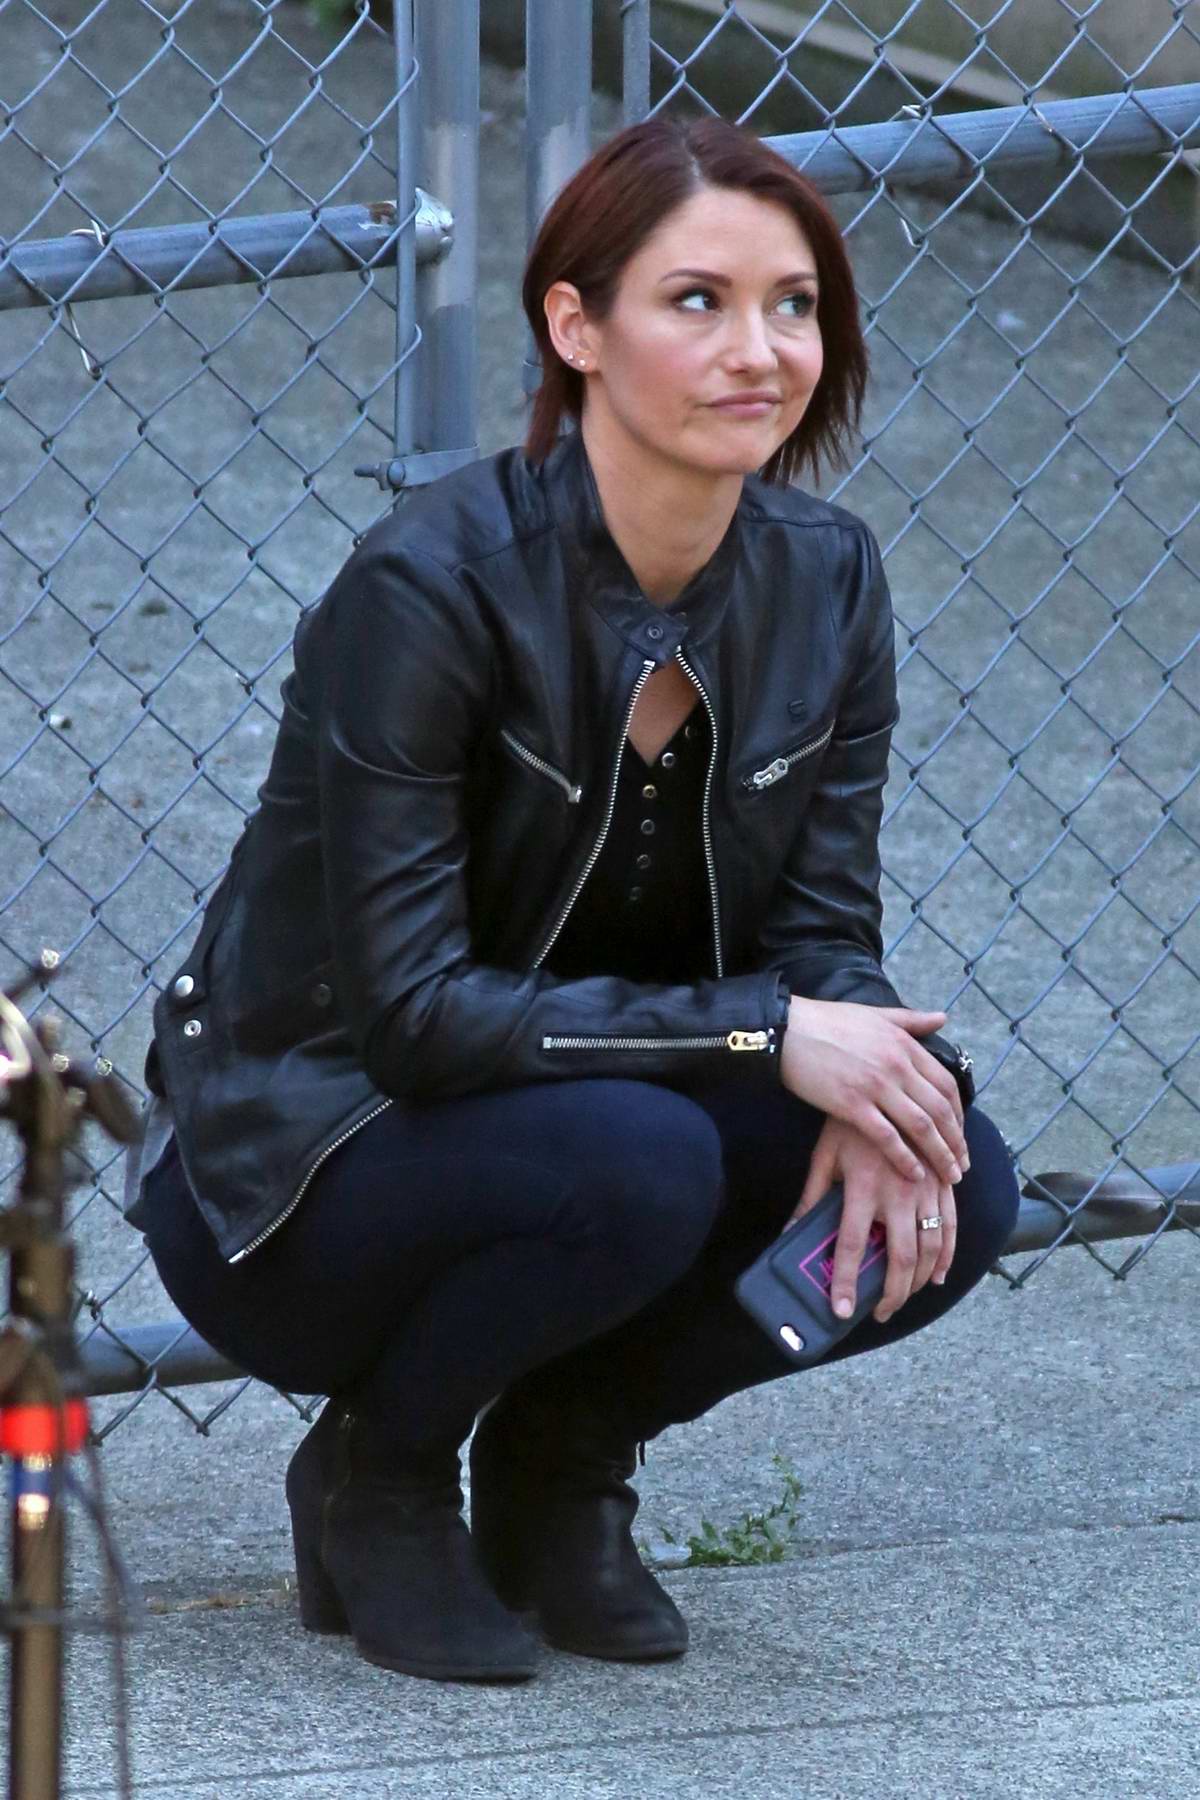 chyler leigh on location shooting supergirl in new westminster  canada-270717_1